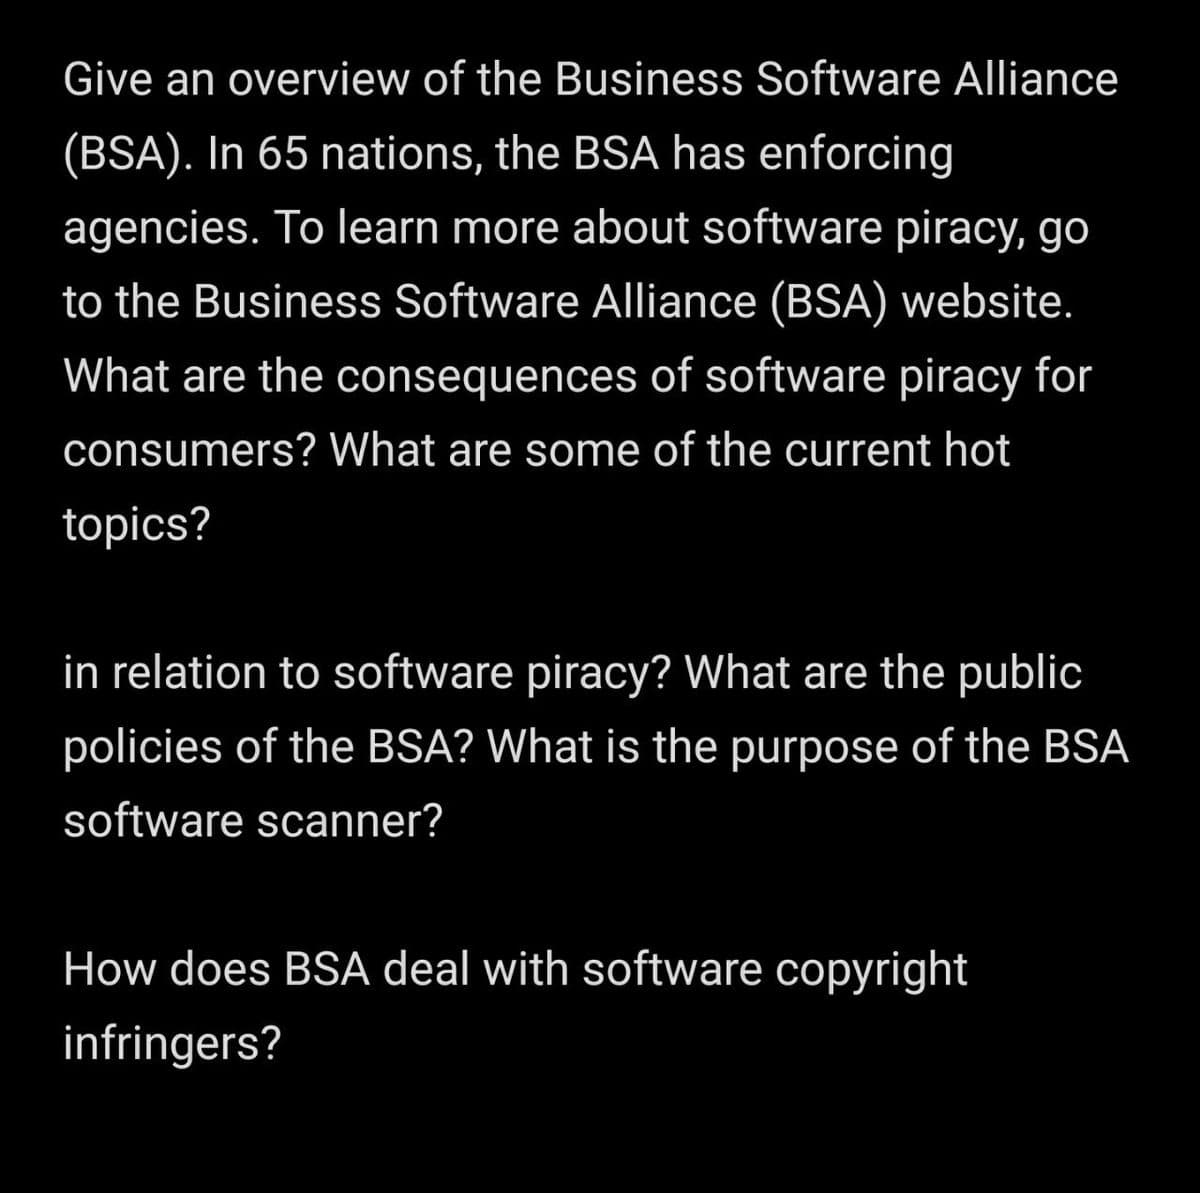 Give an overview of the Business Software Alliance
(BSA). In 65 nations, the BSA has enforcing
agencies. To learn more about software piracy, go
to the Business Software Alliance (BSA) website.
What are the consequences of software piracy for
consumers? What are some of the current hot
topics?
in relation to software piracy? What are the public
policies of the BSA? What is the purpose of the BSA
software scanner?
How does BSA deal with software copyright
infringers?
